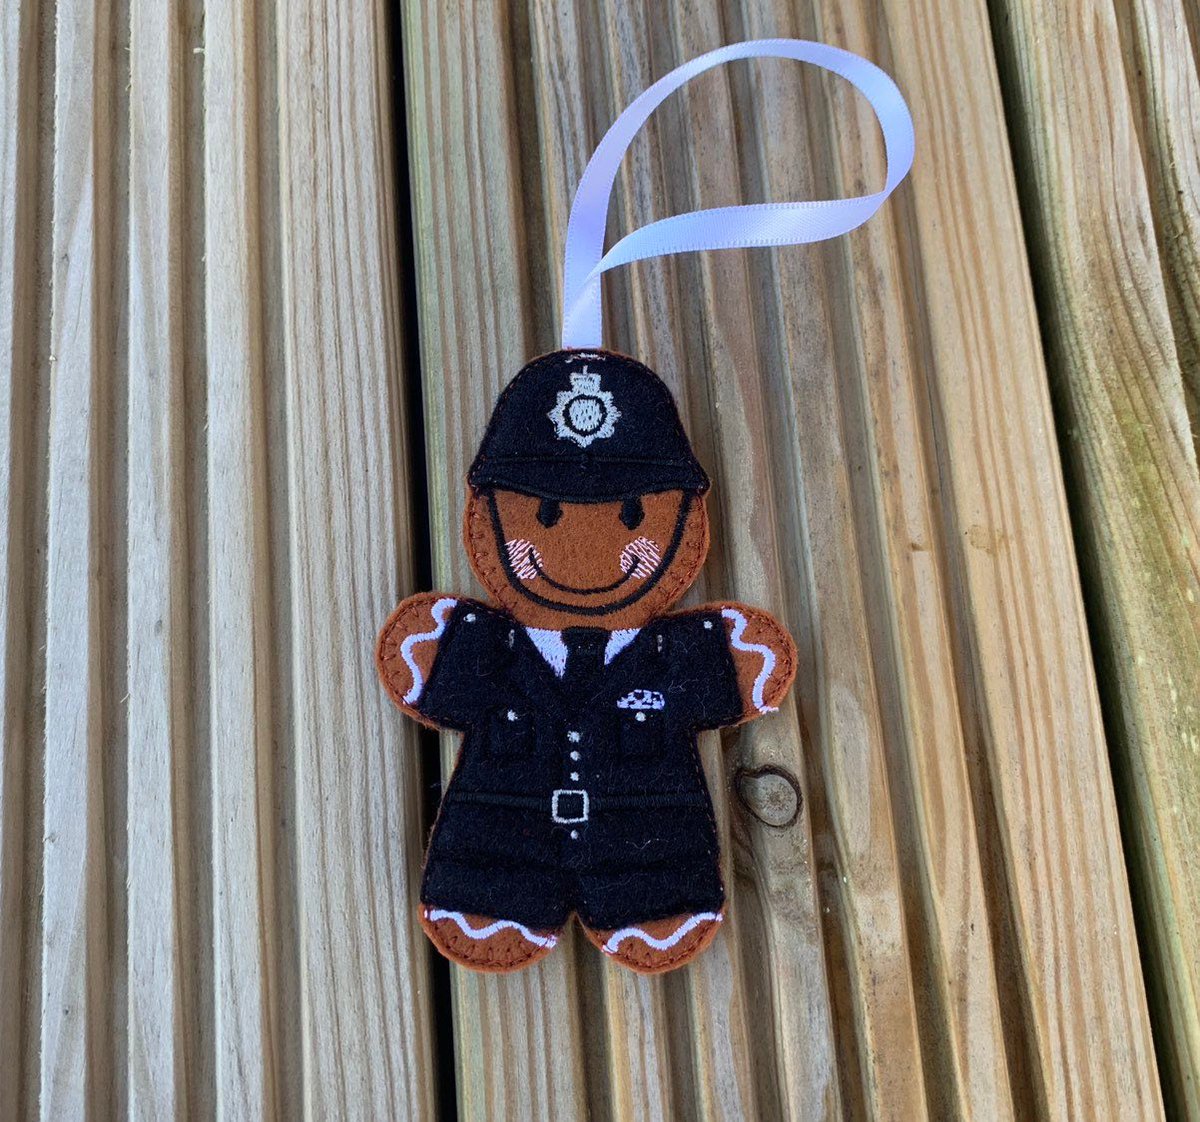 Excited to share this item from my #etsy shop: Gingerbread Policeman, Gingerbread Decoration, Policeman Decoration, Personalised Policeman Gift #policemengift #policemanornament #personalisedpolice #policemangift #gingerbread etsy.me/3DagM6K